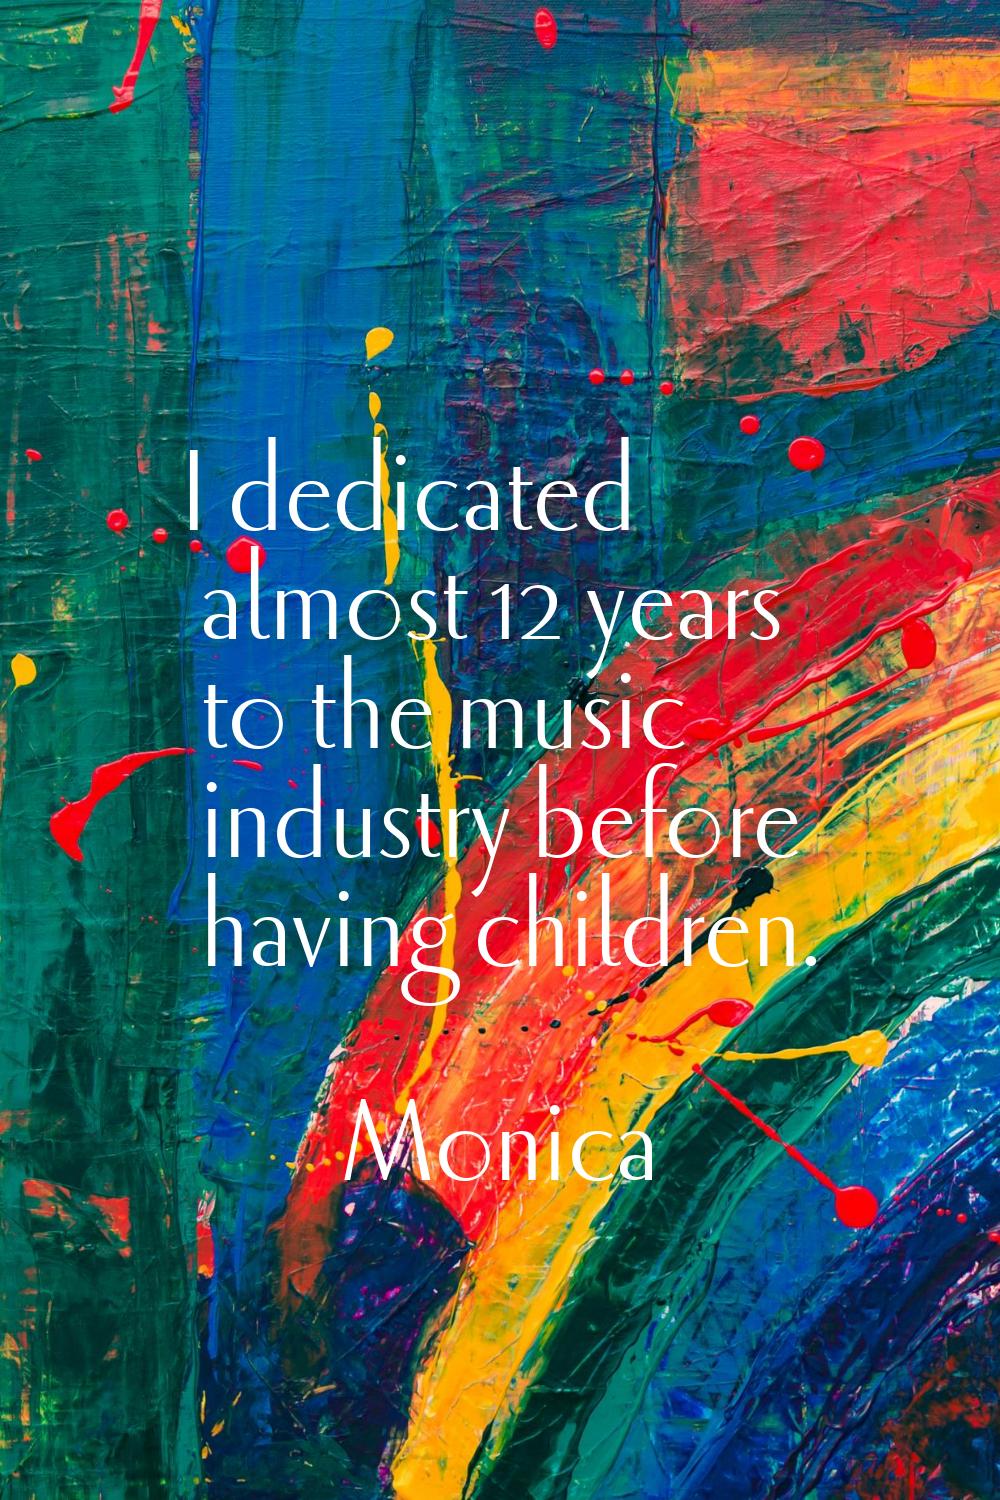 I dedicated almost 12 years to the music industry before having children.